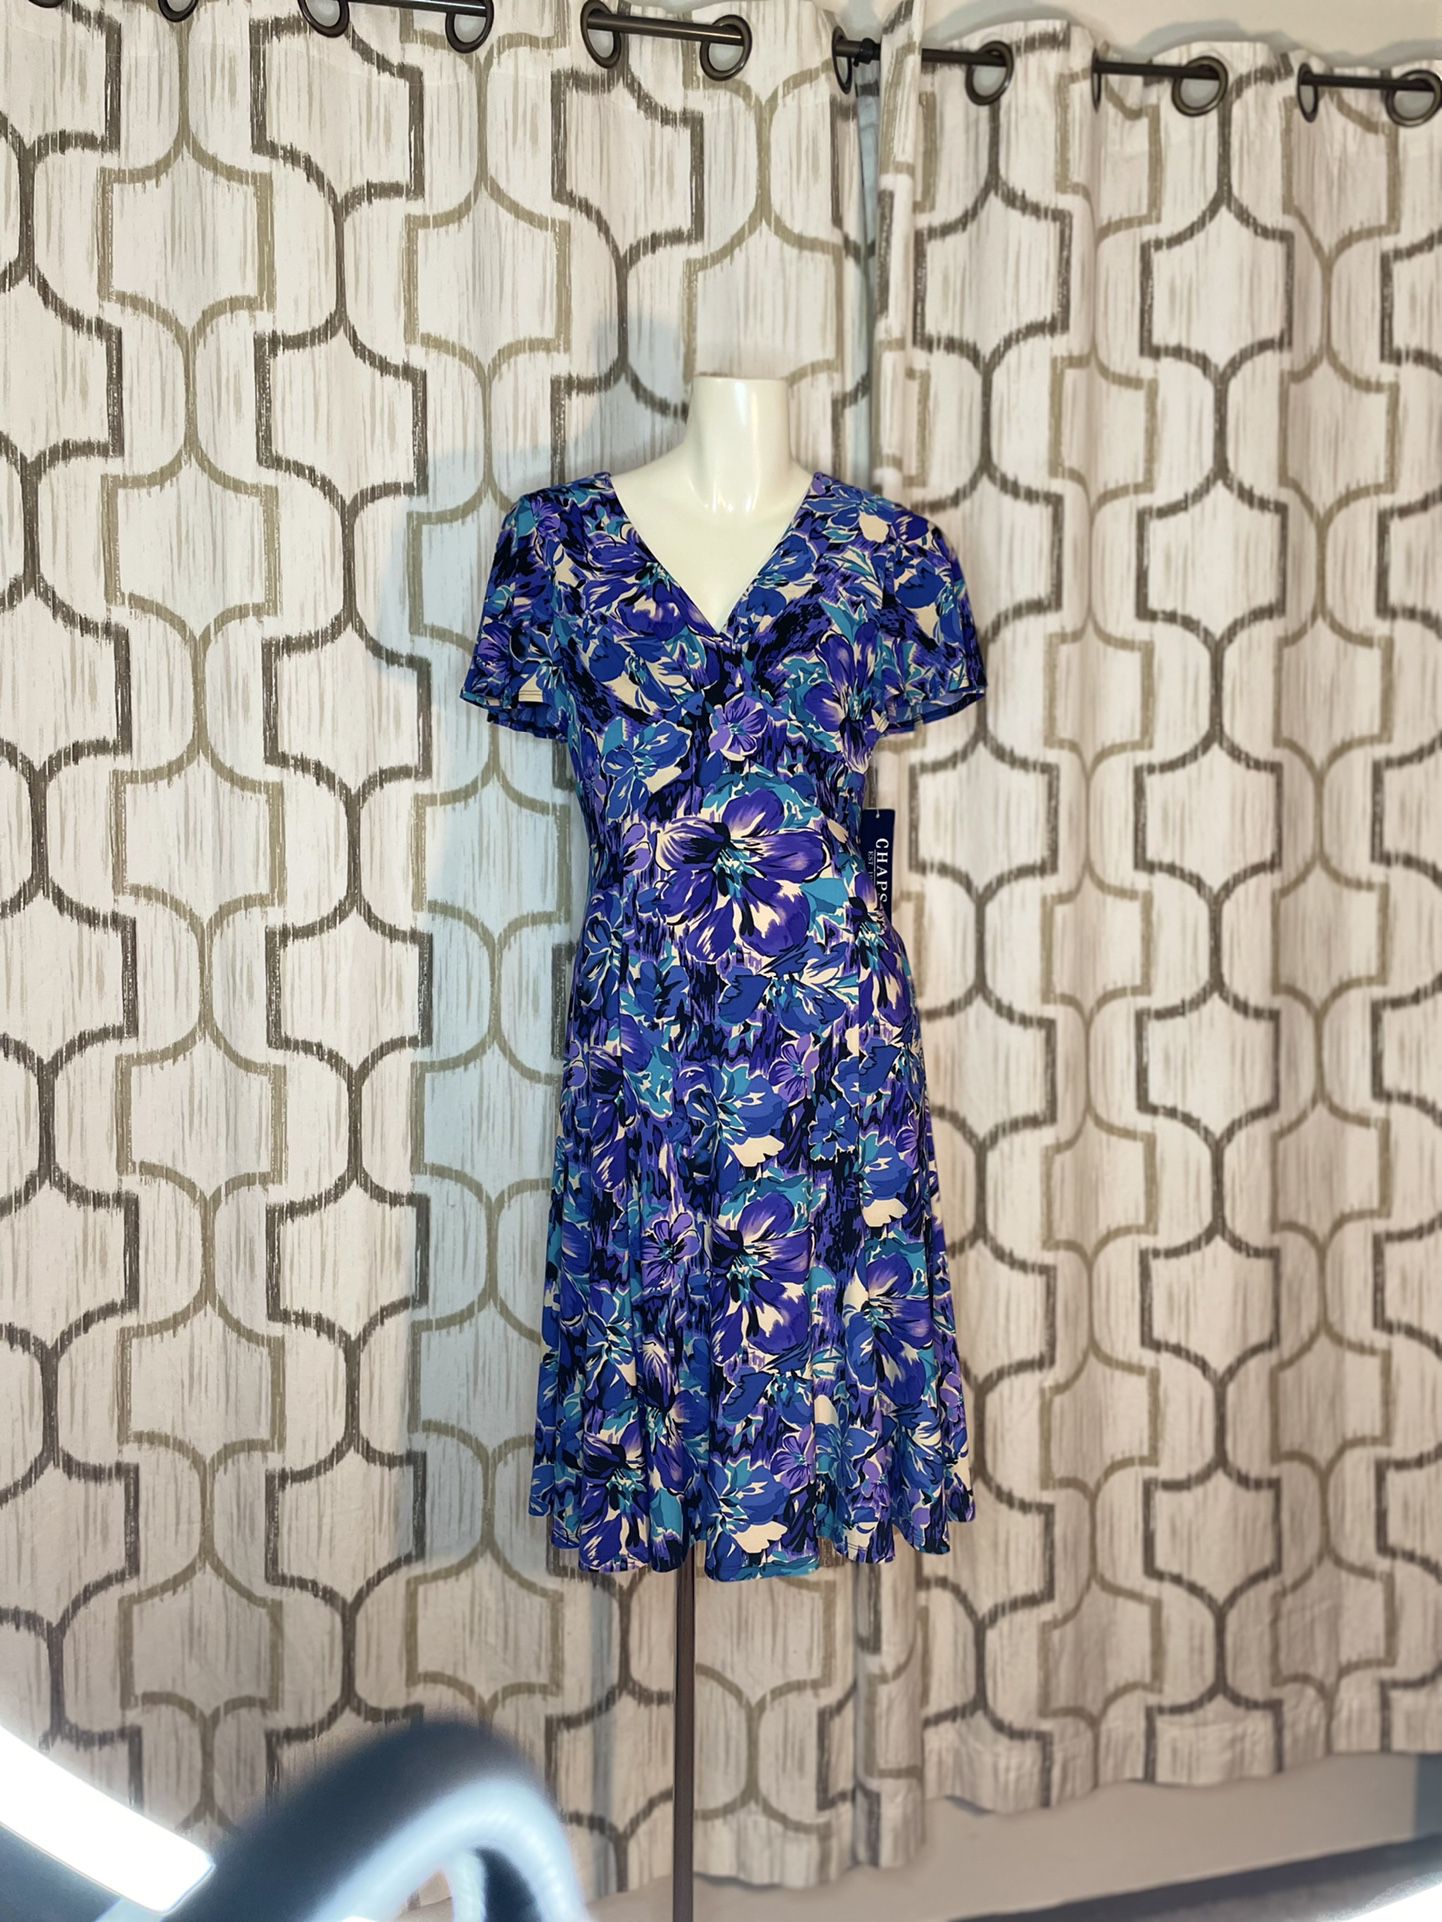 Women’s Medium Chap’s Dress- New With Tags